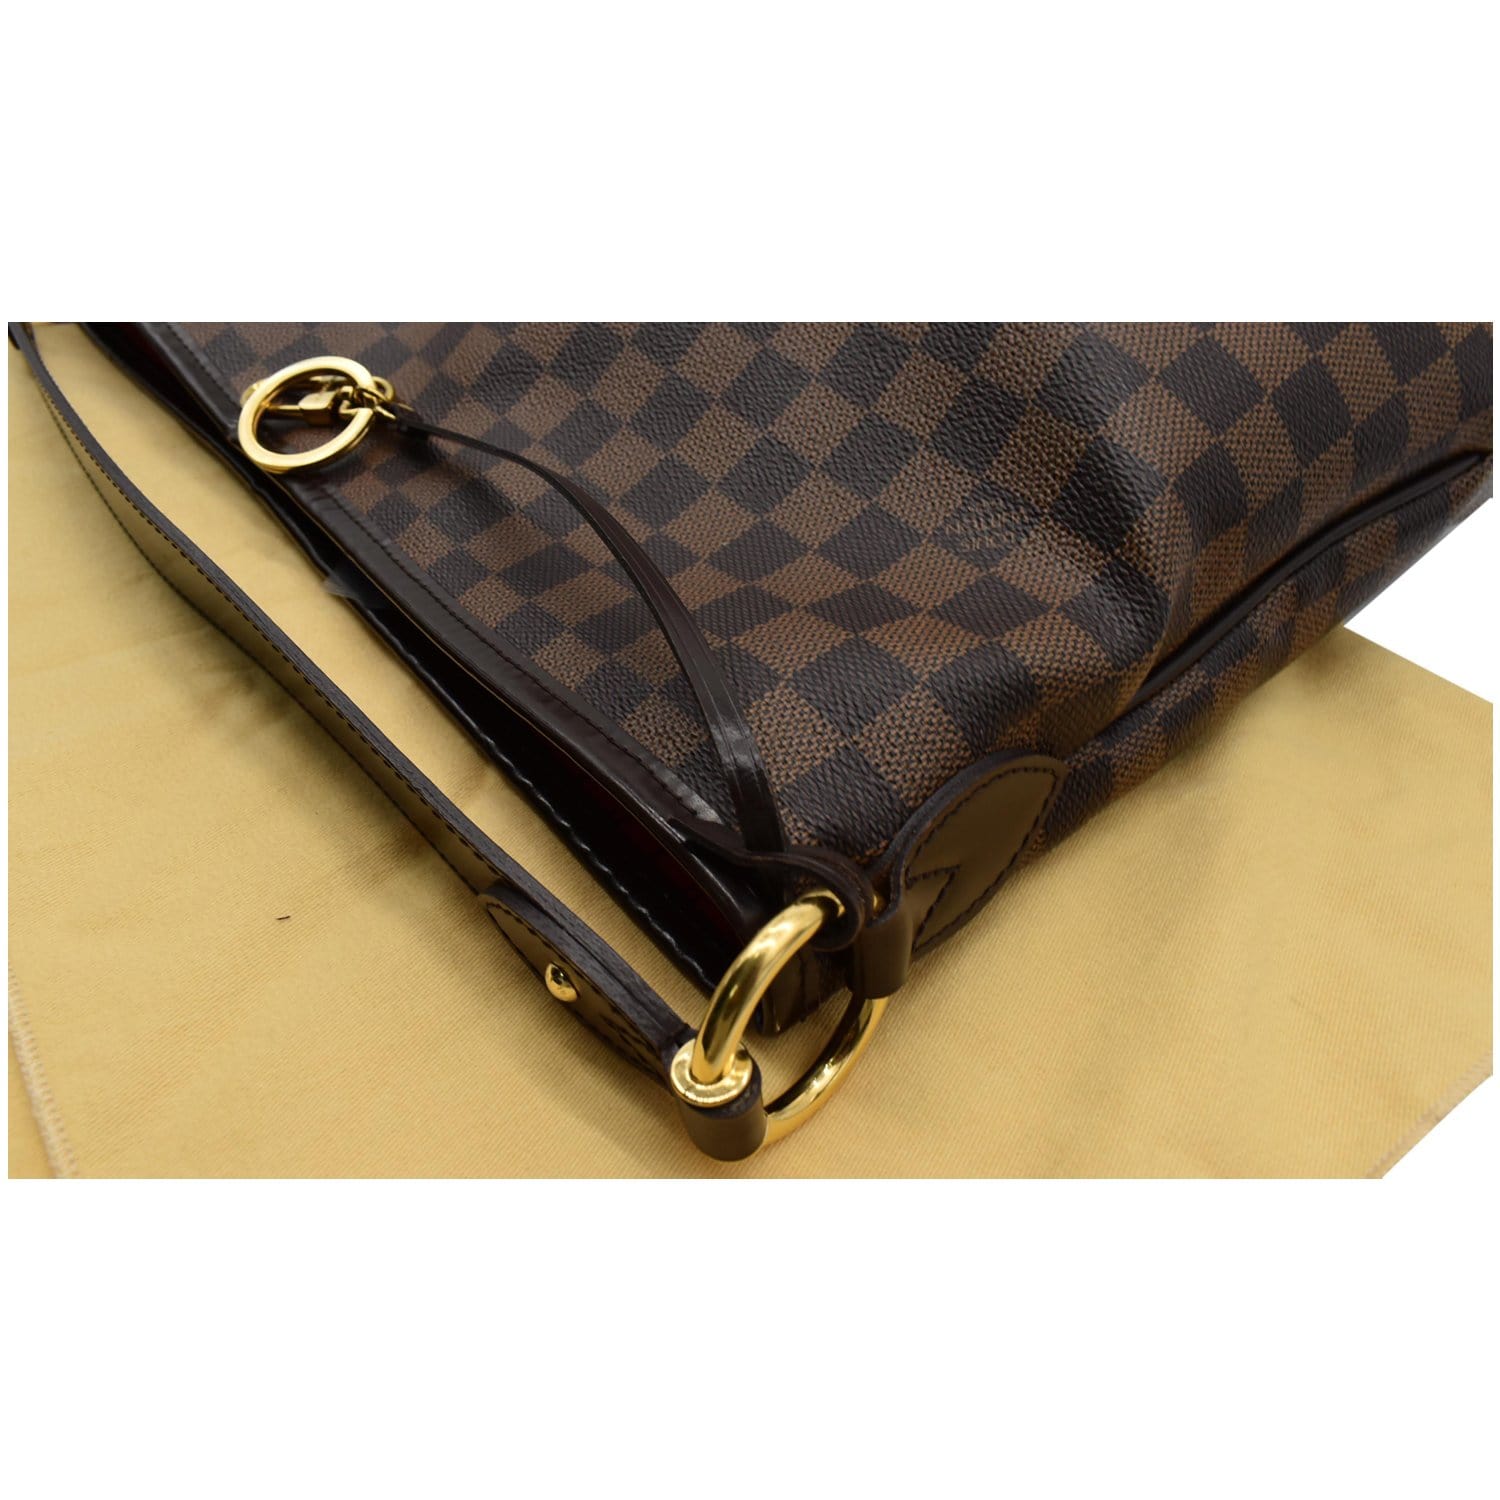 Louis Vuitton 2015 pre-owned Delightful MM Tote Bag - Farfetch